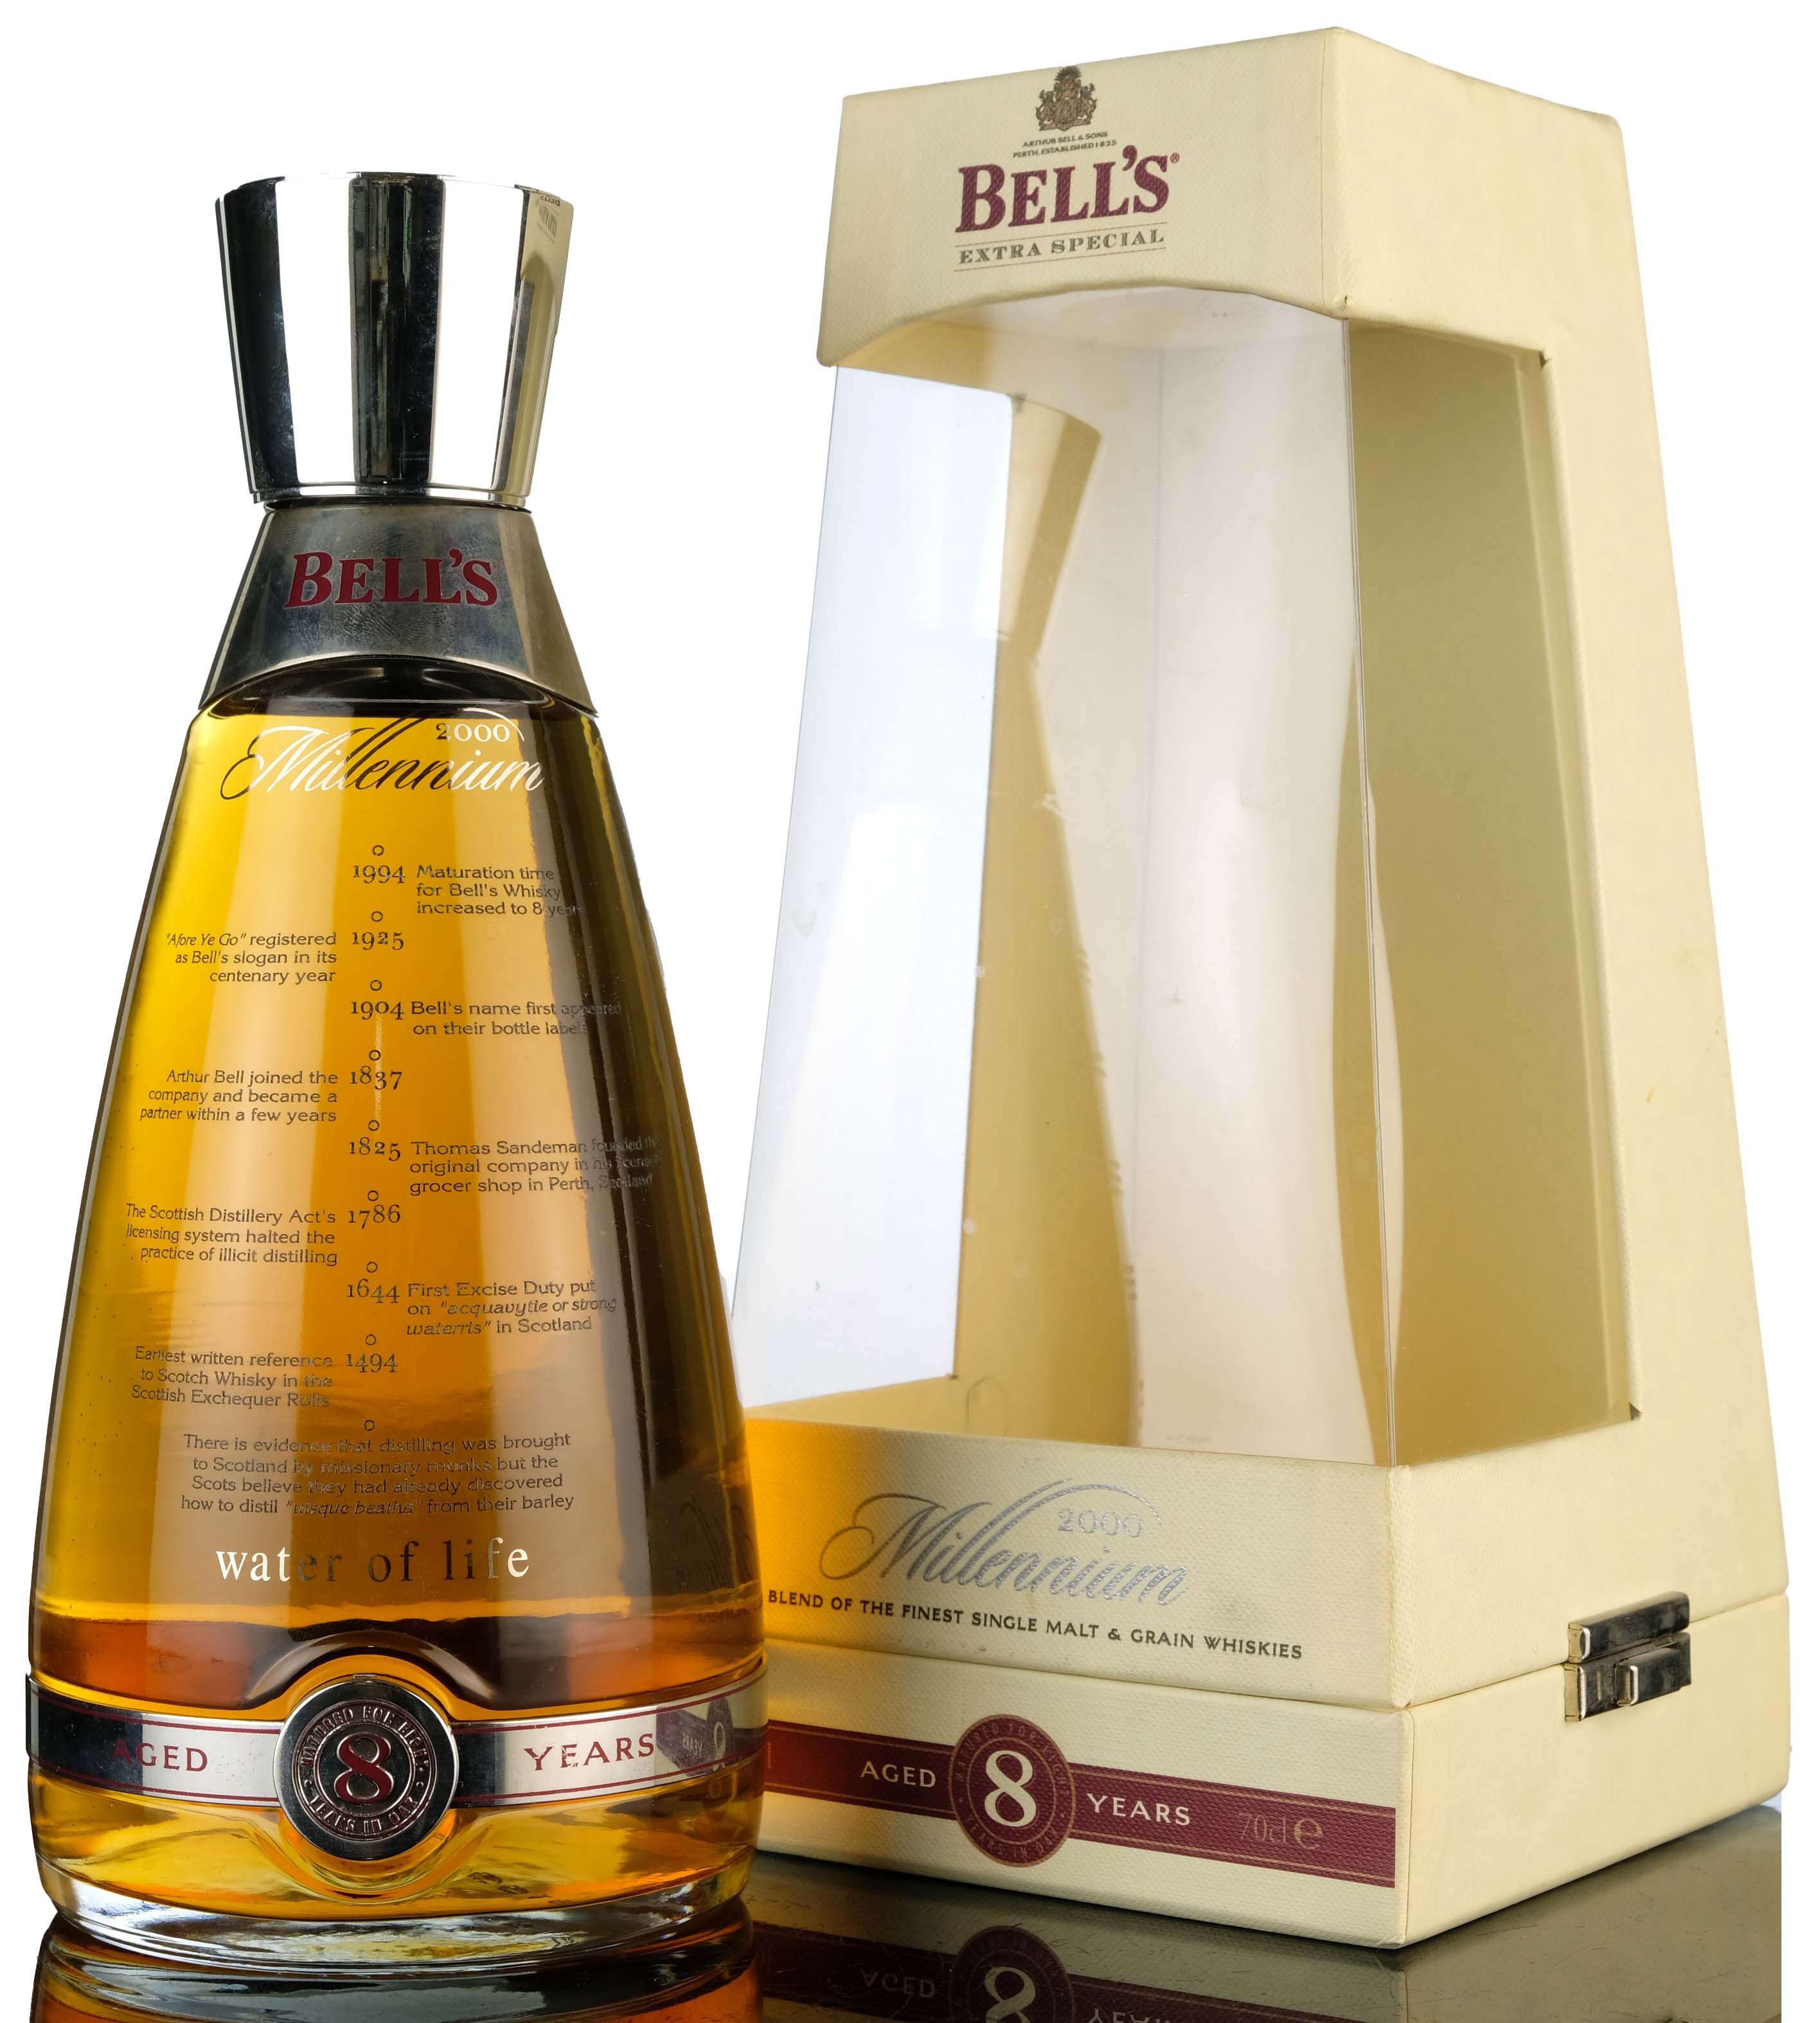 Bells 8 Year Old Extra Special - Millennium 2000 Decanter